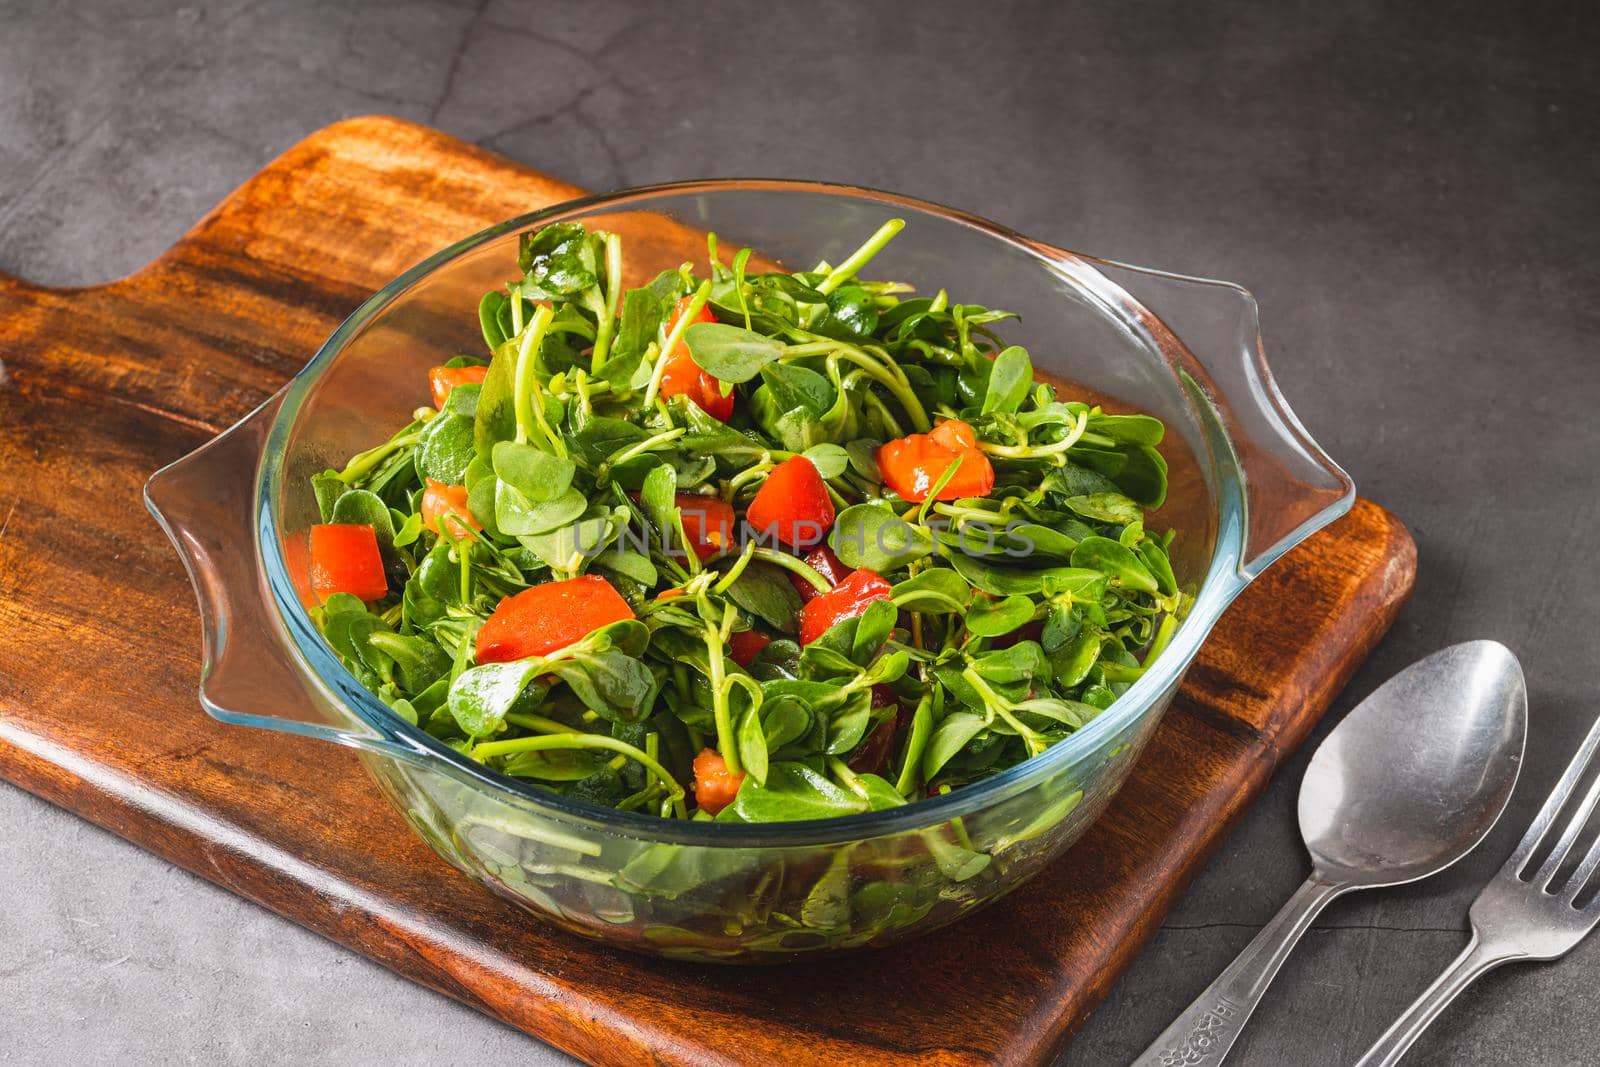 Purslane salad with tomatoes in a glass bowl. Healthy eating concept by Sonat